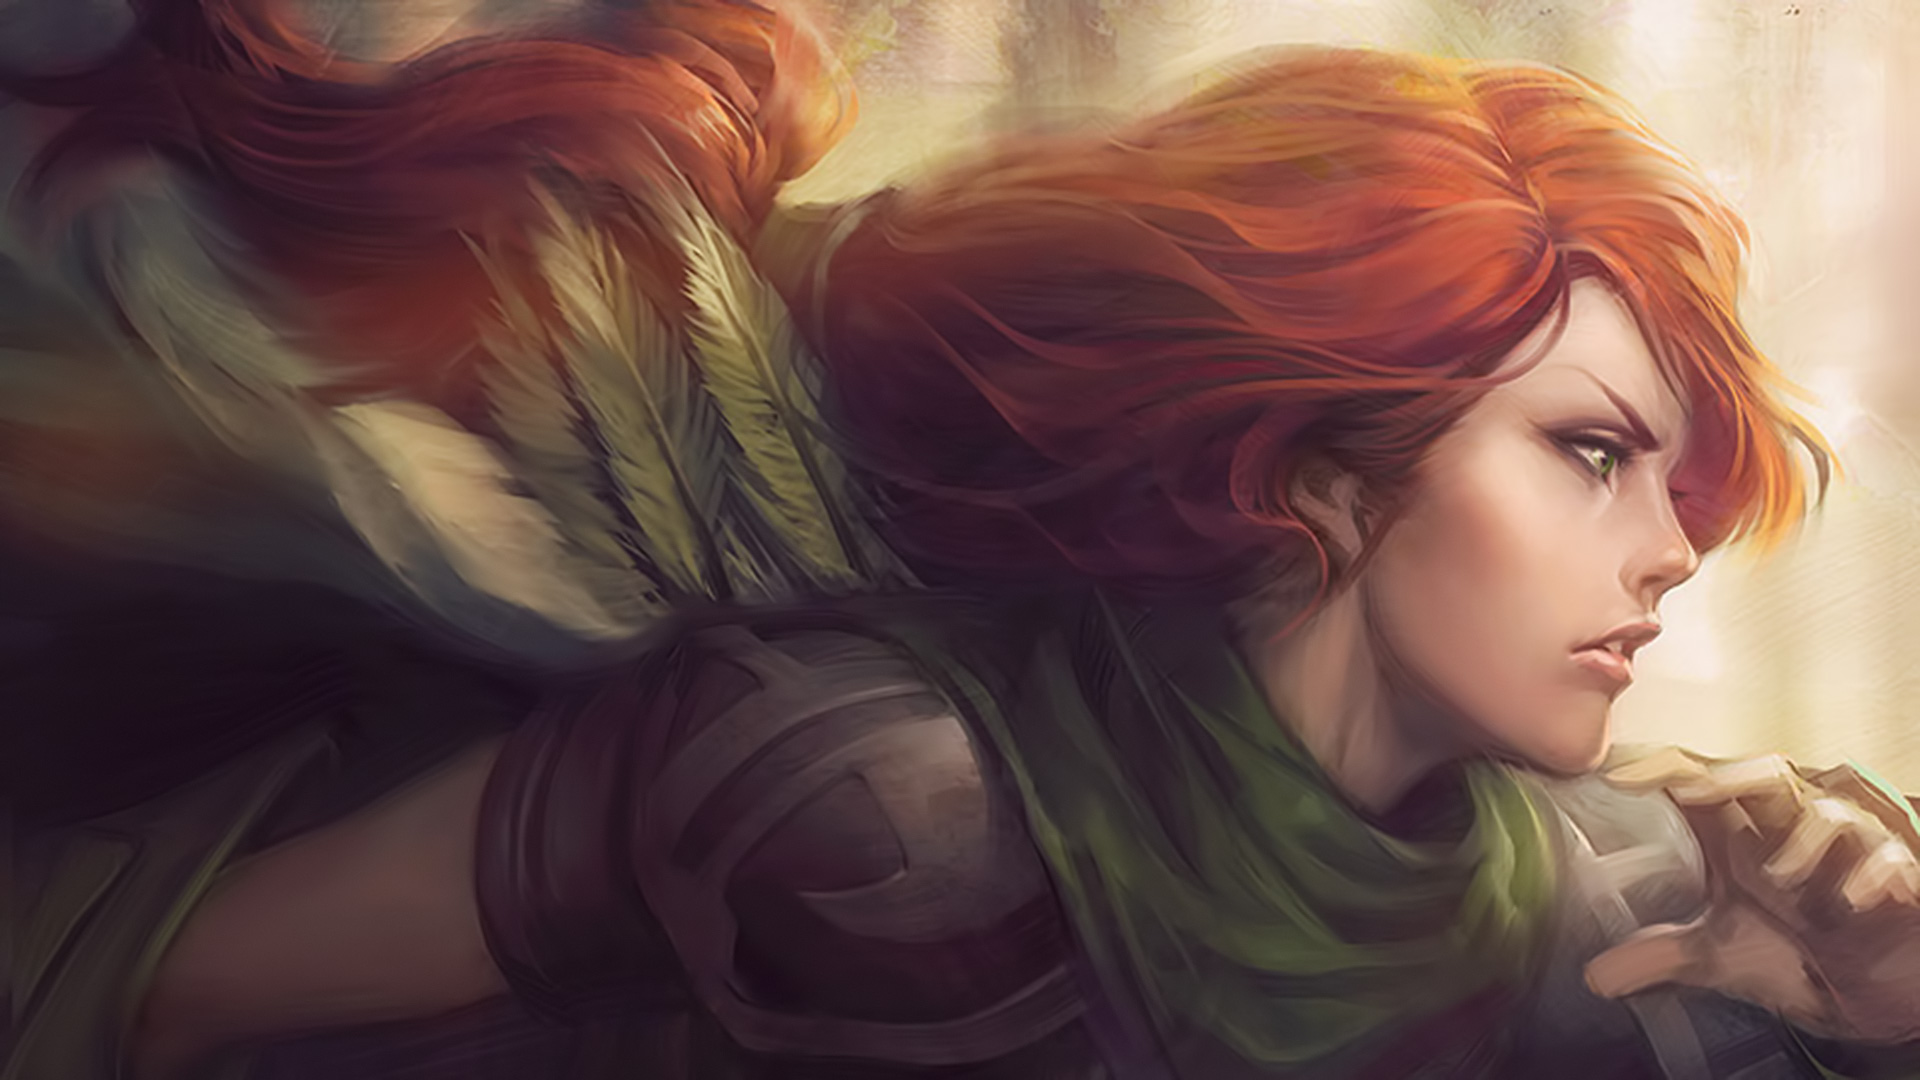 dota 2 wallpapers hd,hair,face,cg artwork,beauty,hairstyle